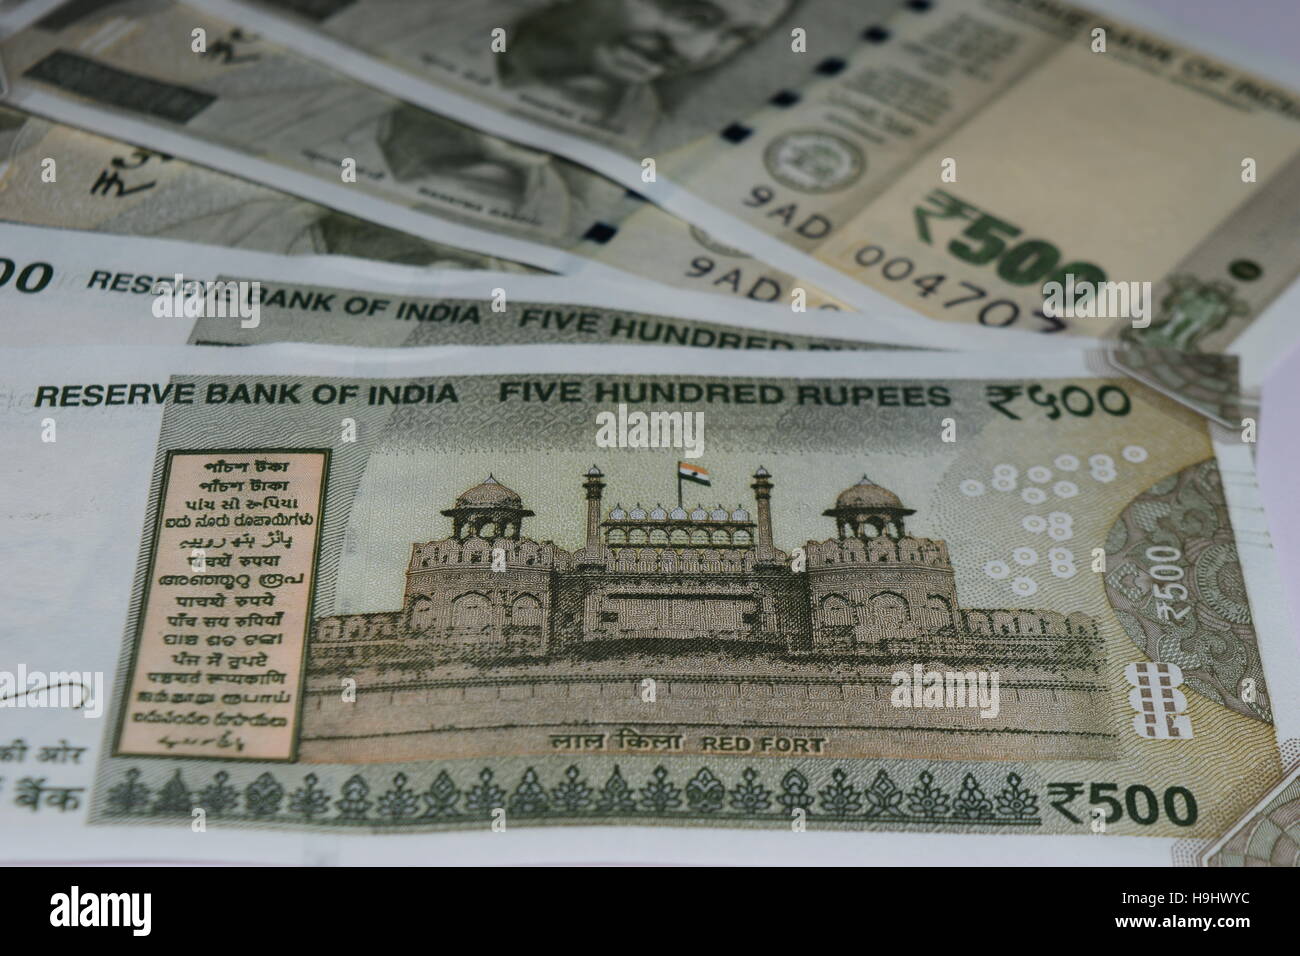 500 Five hundred Rupees India currency notes closeup view of red fort display and languages of India Stock Photo